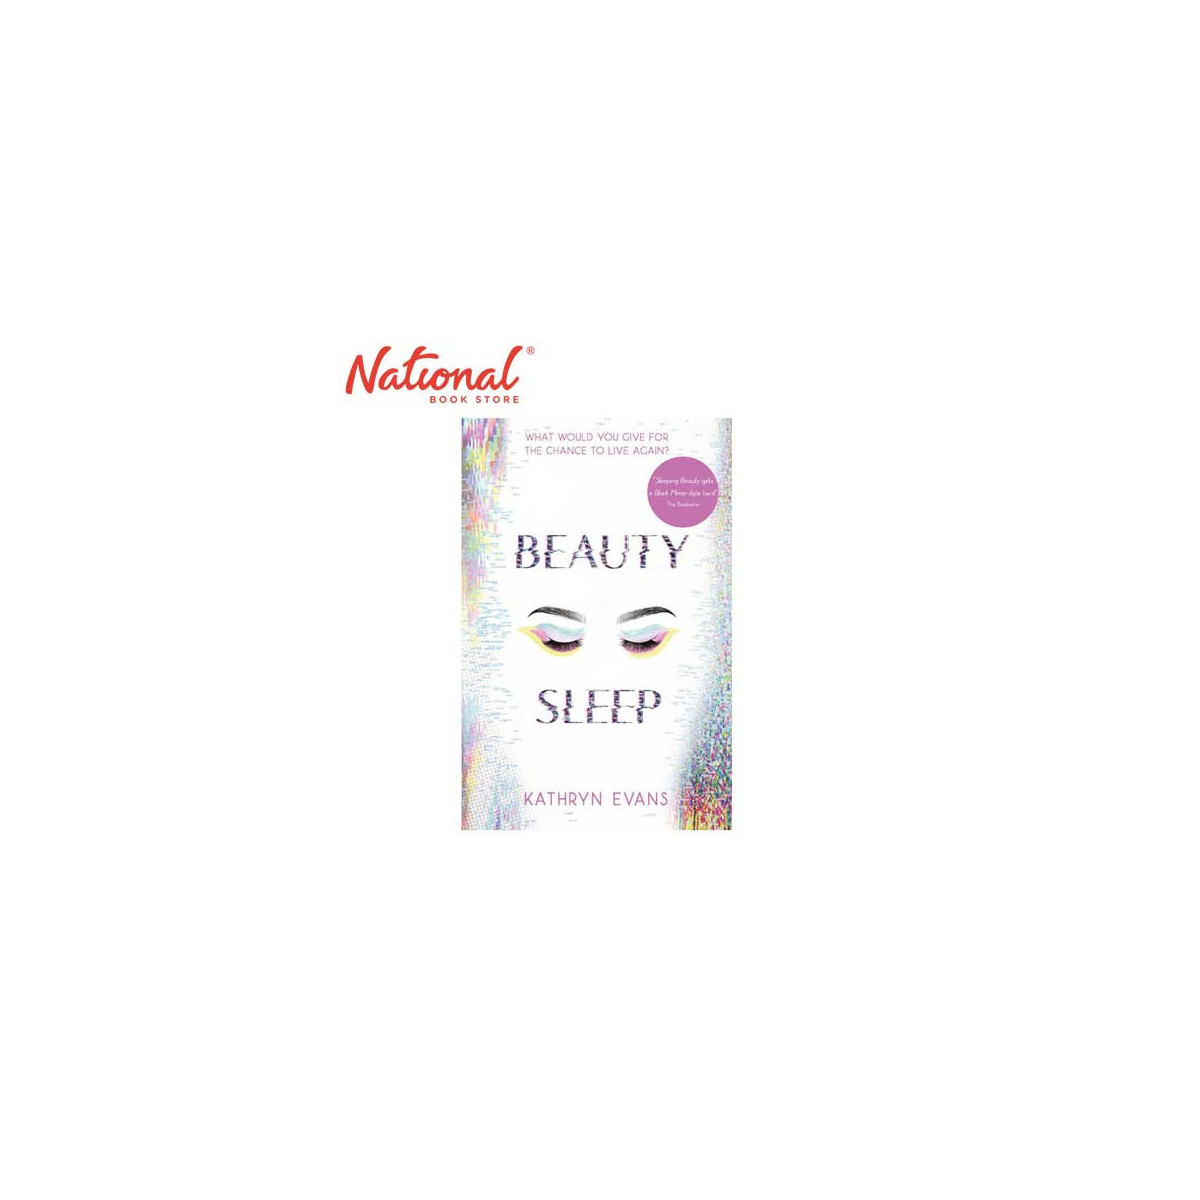 Beauty Sleep by Kathryn Evans - Trade Paperback - Teens Fiction - Thriller - Mystery - Suspense